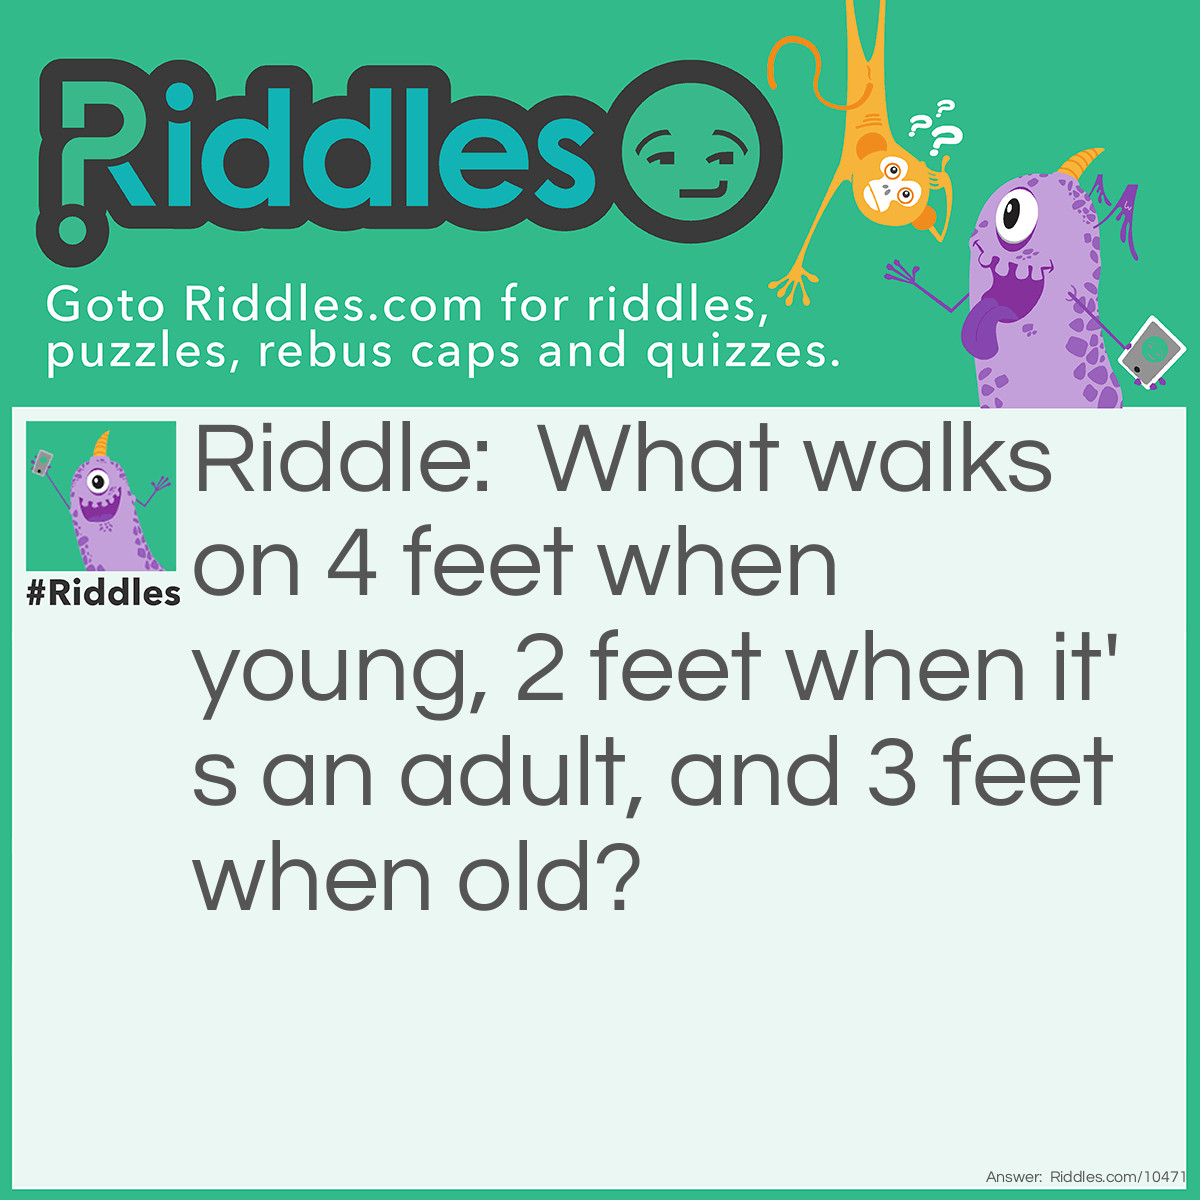 Riddle: What walks on 4 feet when young, 2 feet when it's an adult, and 3 feet when old? Answer: A human! A baby use it hands like legs, a adult walks on to feet, and a old person uses a cane to walk so it is 3 feet.